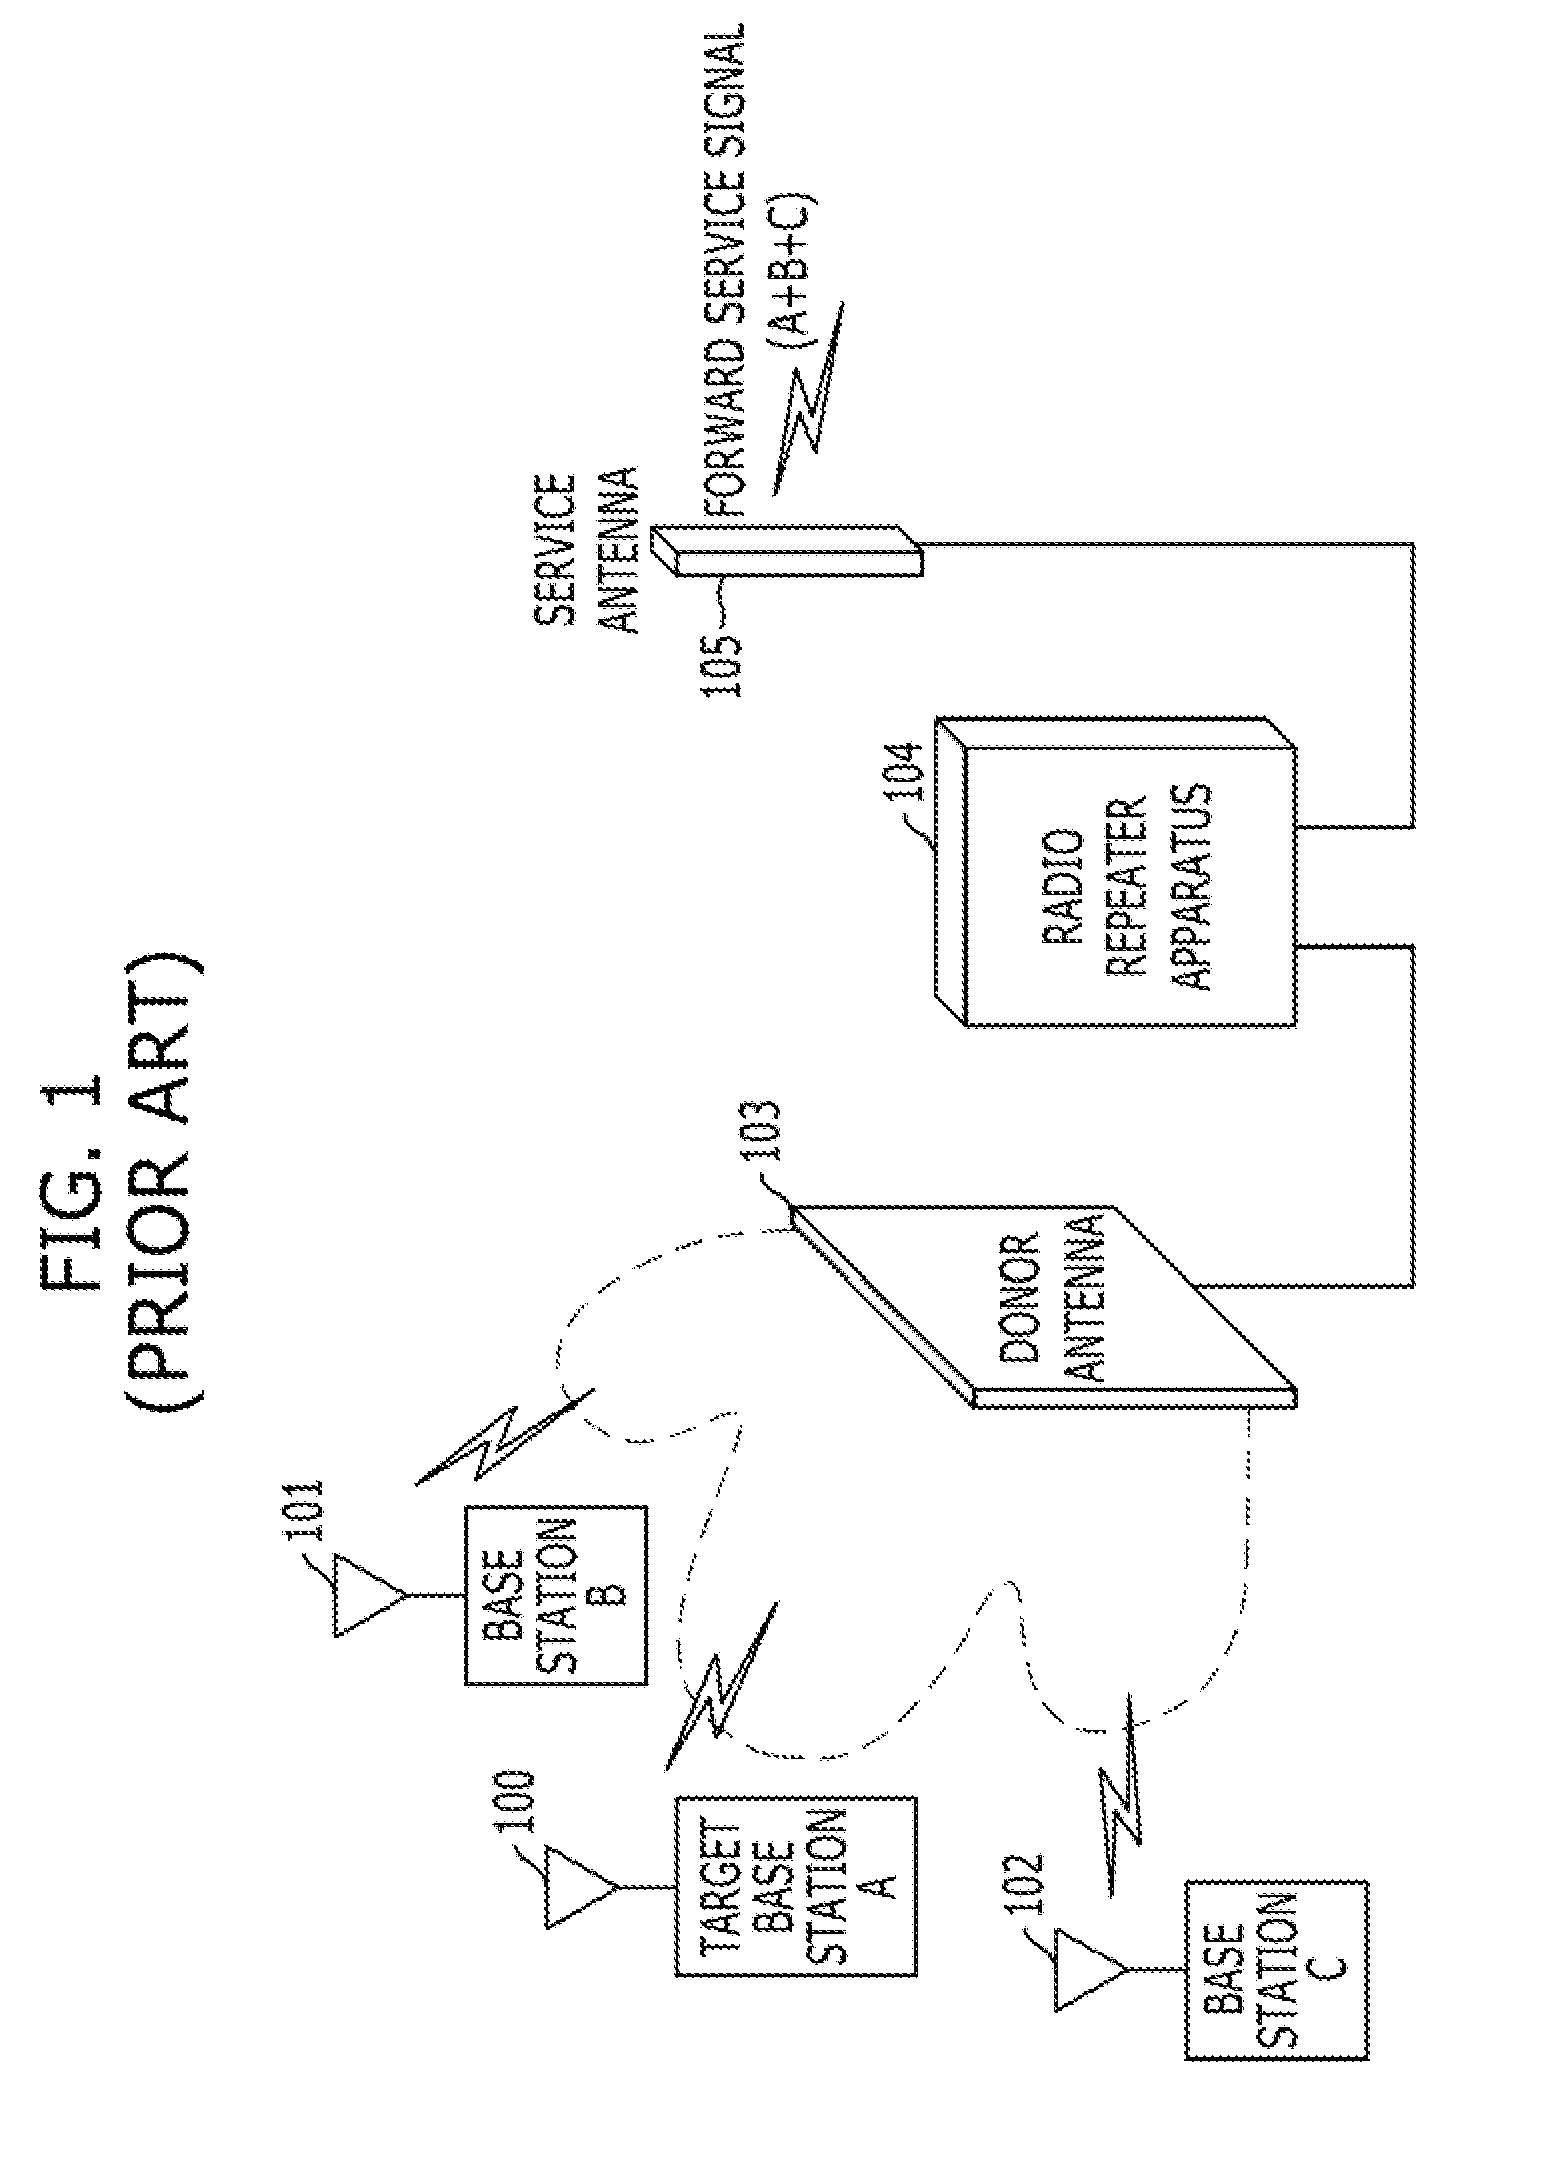 Radio repeater apparatus and system, and operating method thereof